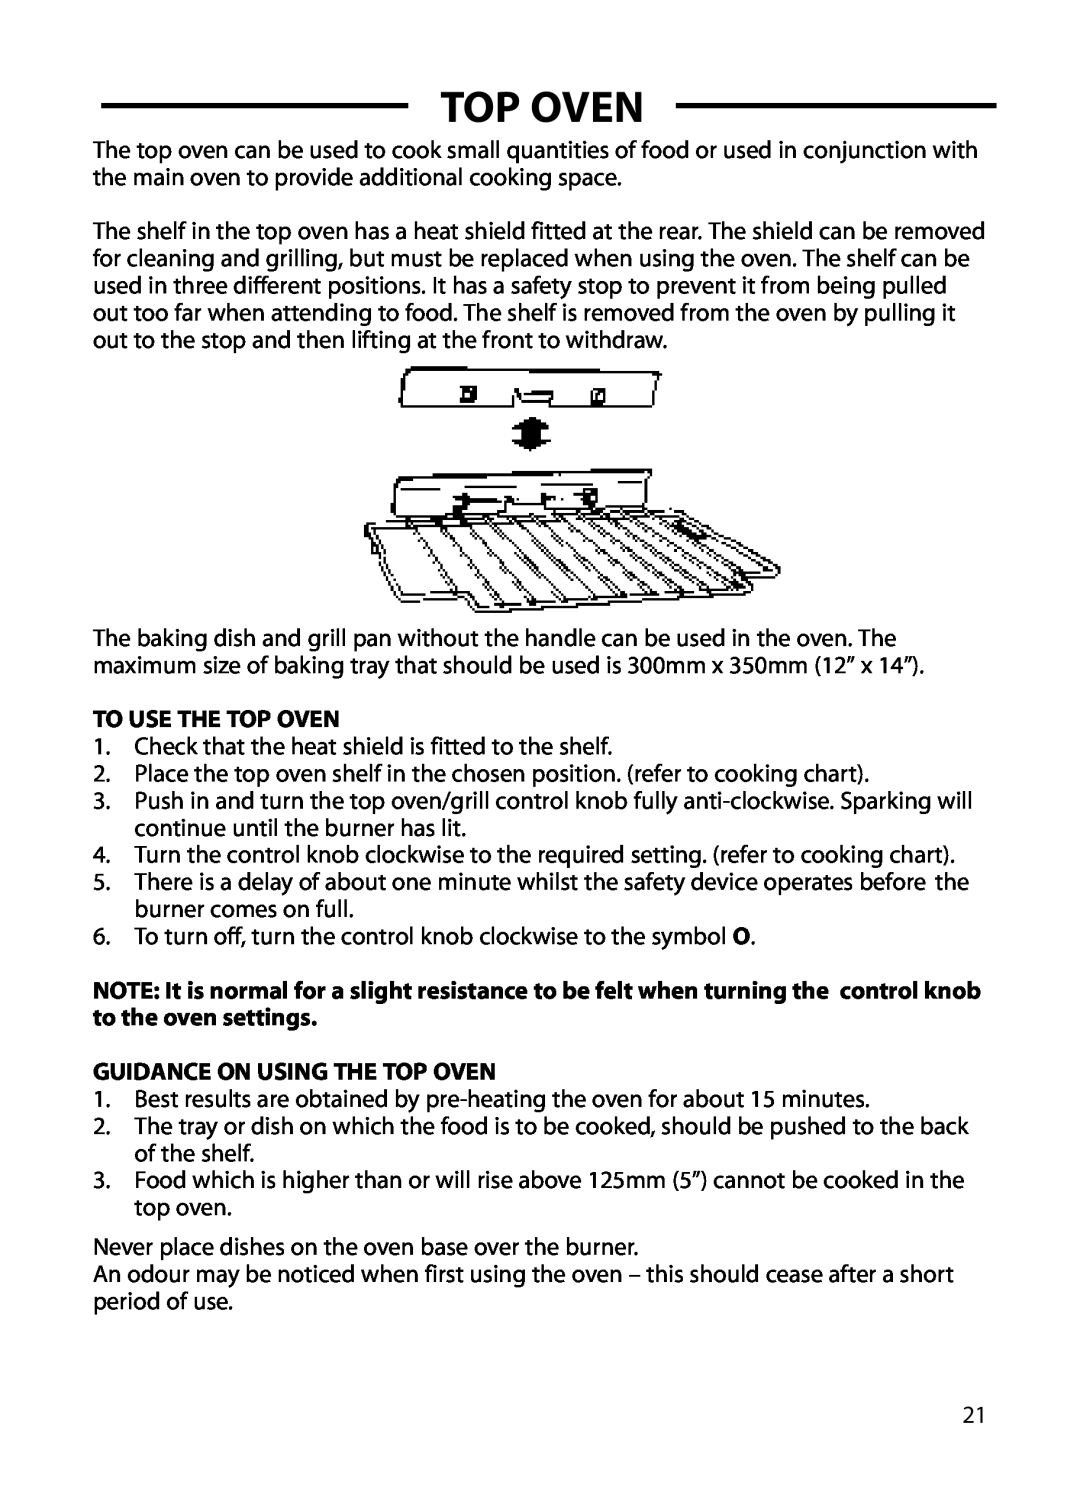 Cannon 10573G, 10574G, 10578G, 10572G, 10576G, 10579G, 10575G To Use The Top Oven, Guidance On Using The Top Oven 